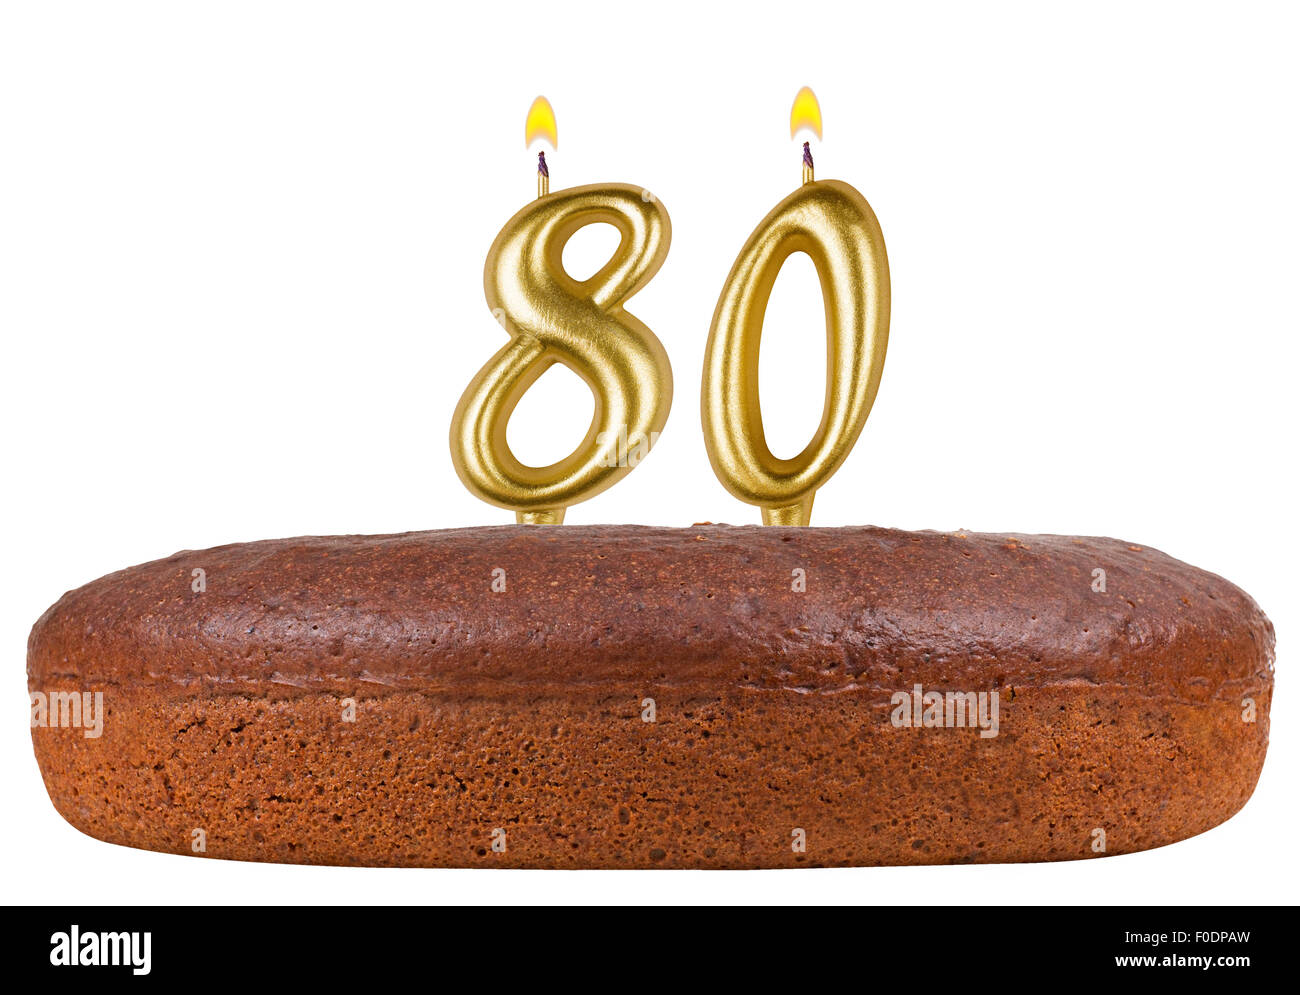 birthday cake candles number 80 isolated Stock Photo